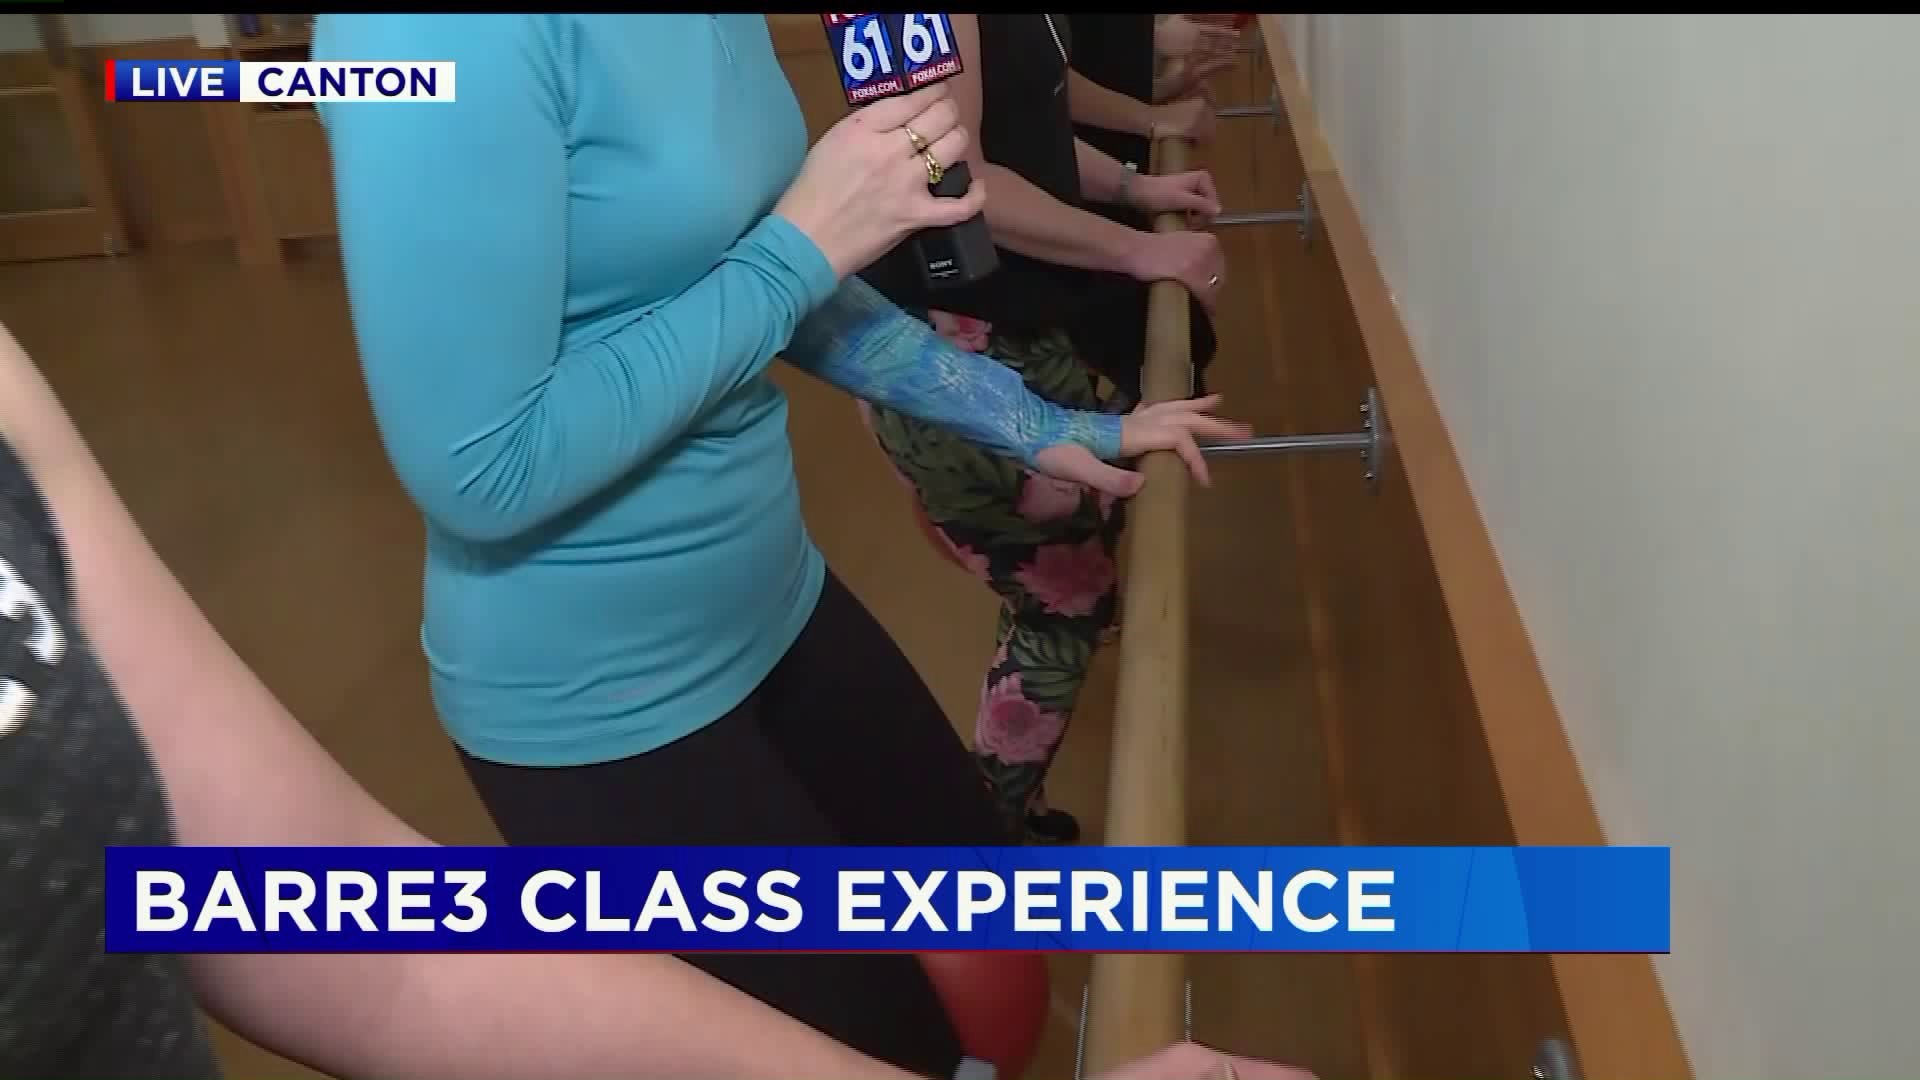 Barre3 class experience